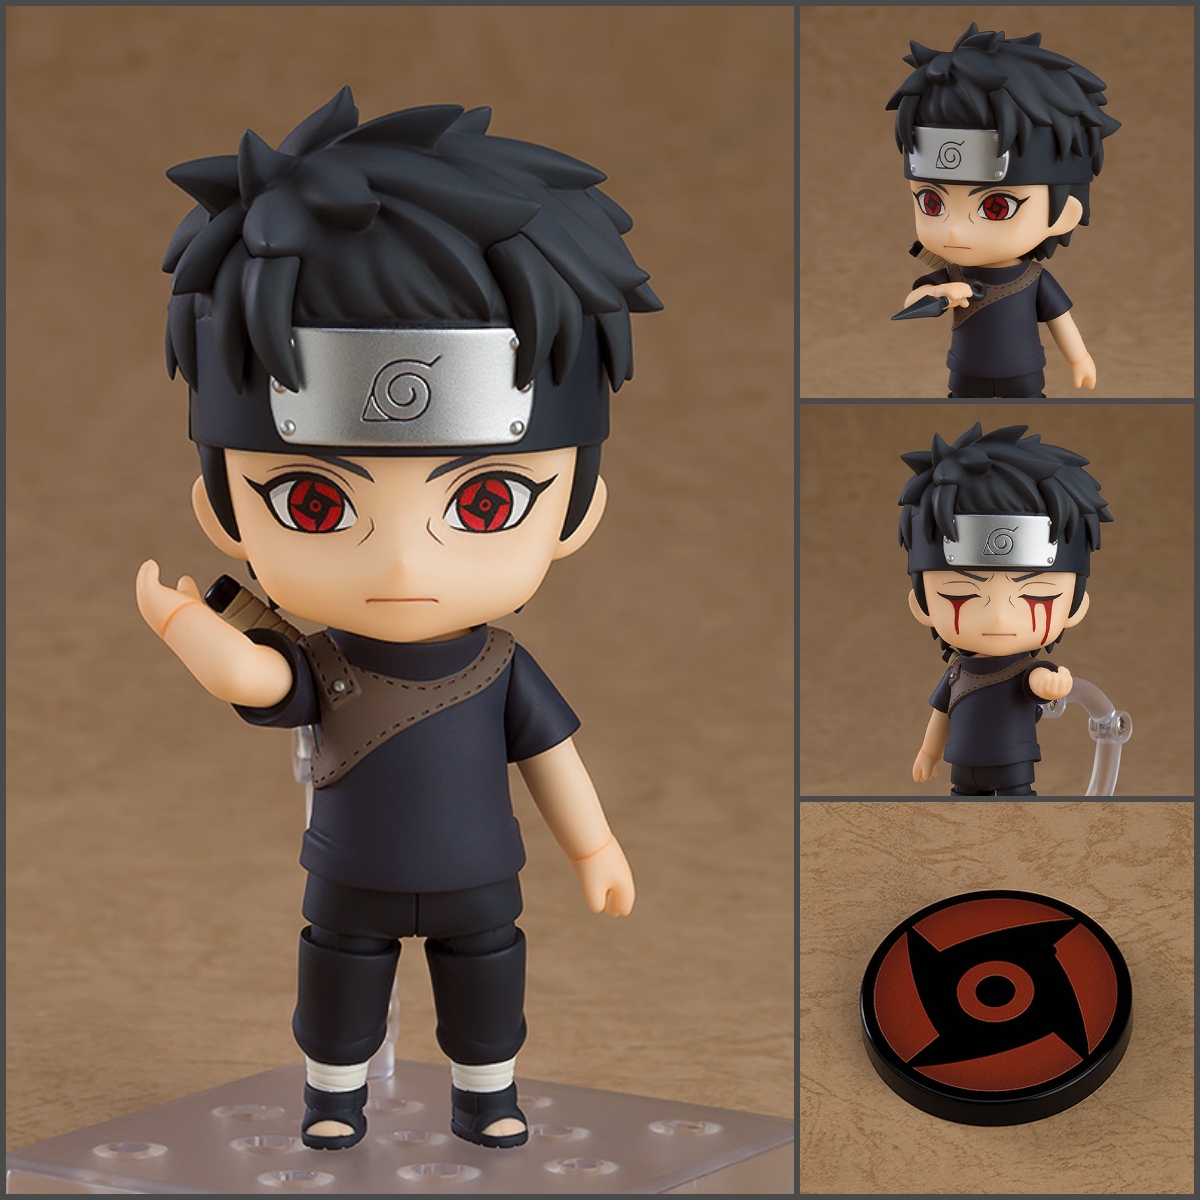 From the popular anime “Naruto Shippuden” comes a Nendoroid of the tragic hero known for his powerful gejutsu, Shisui Uchiha! Don't miss out on the GSC Exclusive Special Round Base! Shop: s.goodsmile.link/hDF #Naruto #Goodsmile